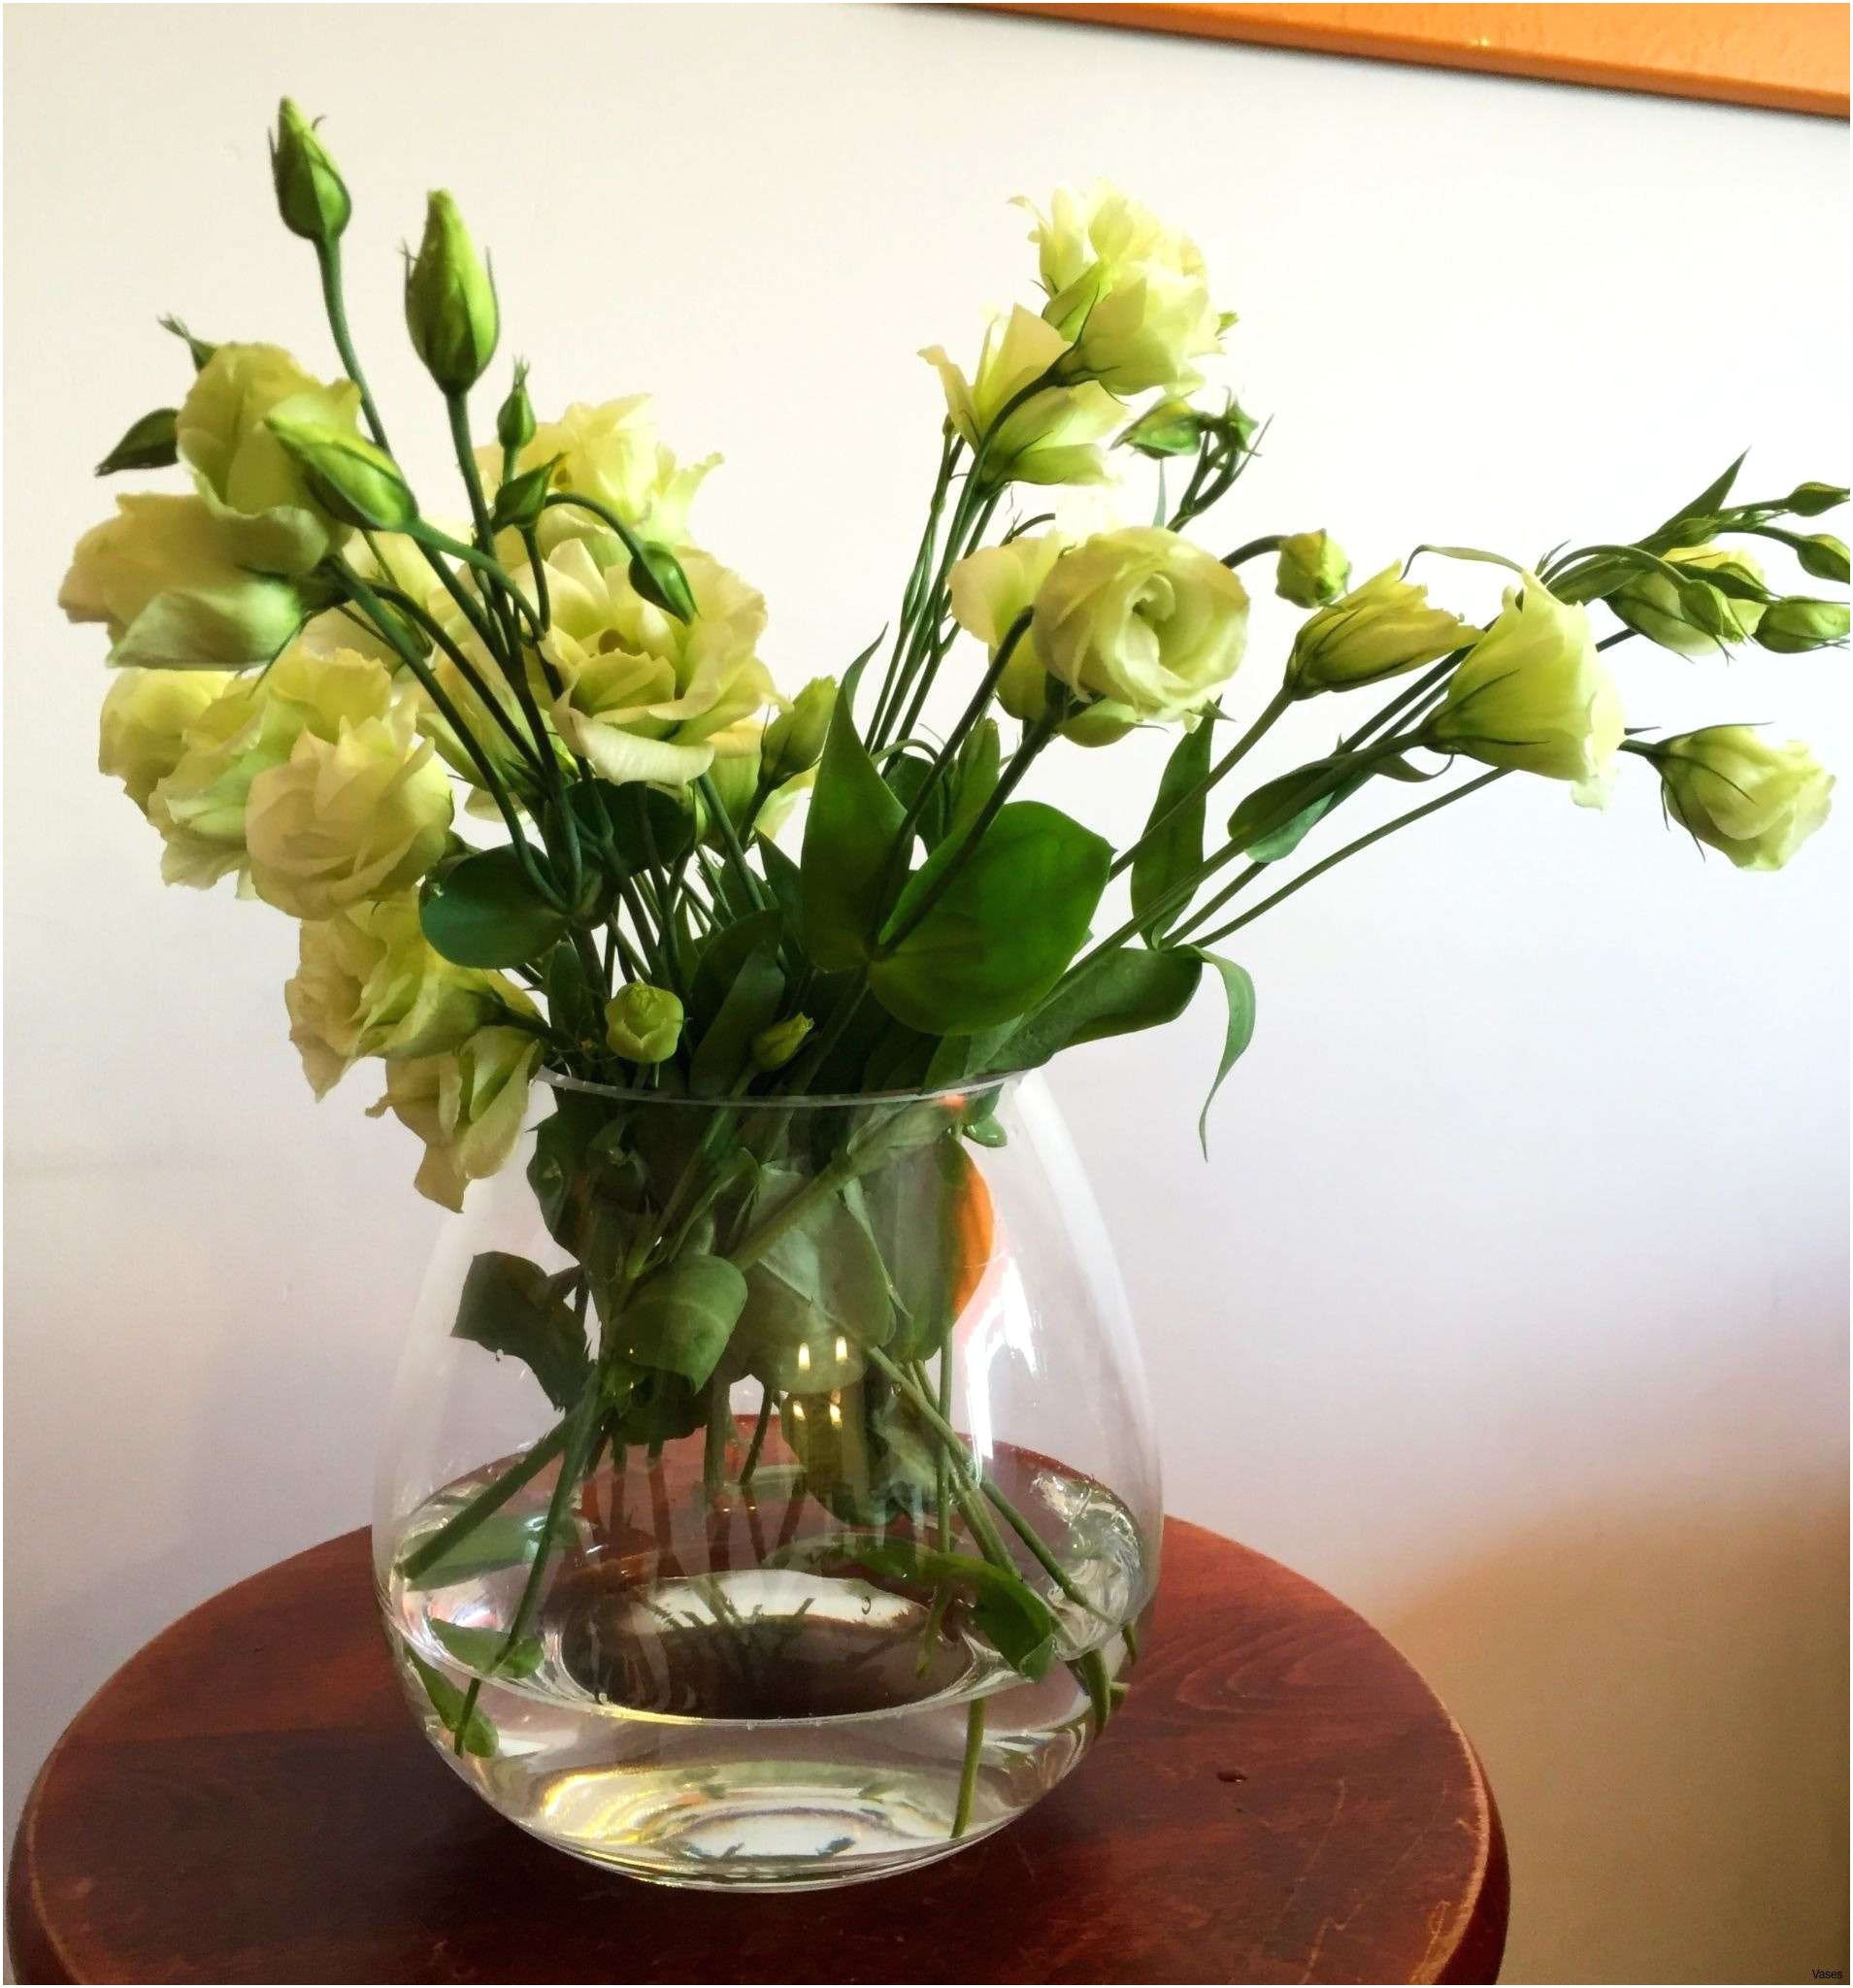 20 Amazing Etched Glass Bud Vase 2024 free download etched glass bud vase of green glass vase images tiger food phenomenal flower vase table 04h intended for green glass vase images tiger food phenomenal flower vase table 04h vases tablei 0d 